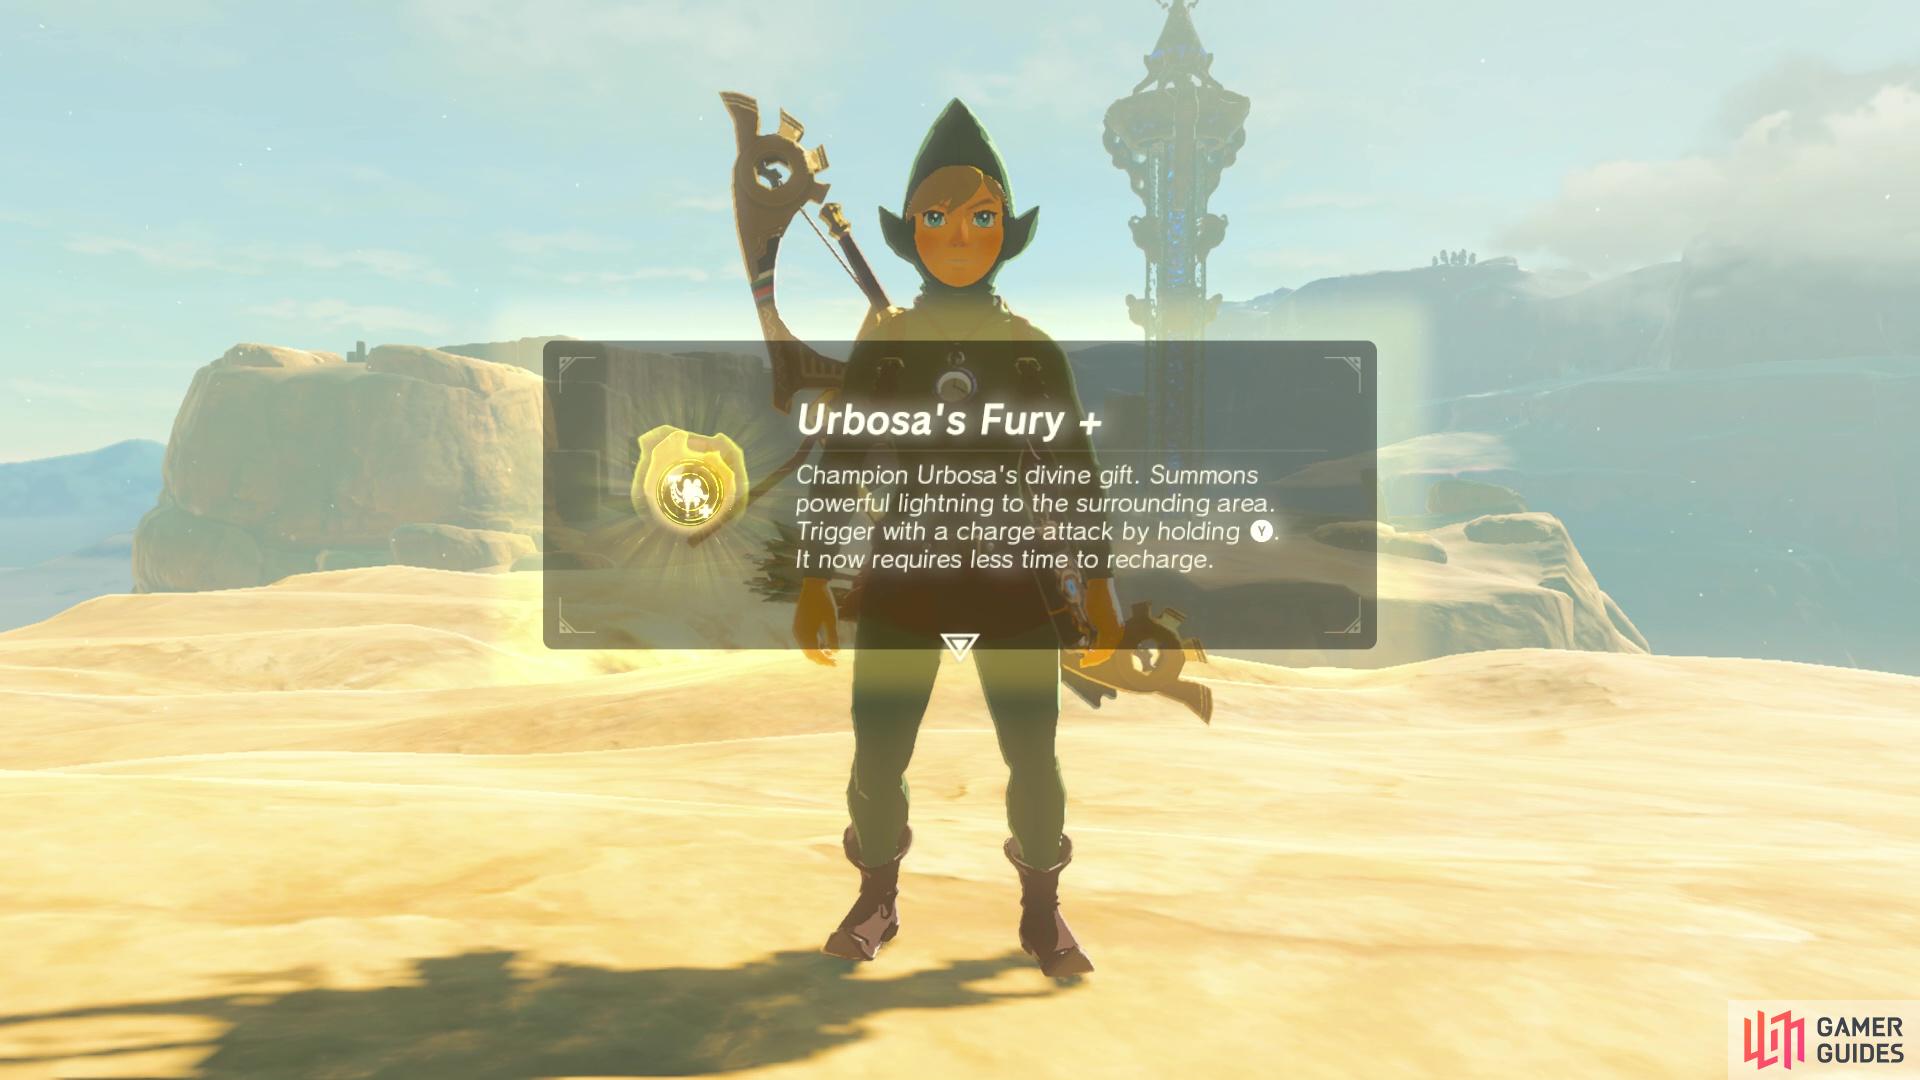 Urbosa’s Fury will recharge a lot quicker - hurray!